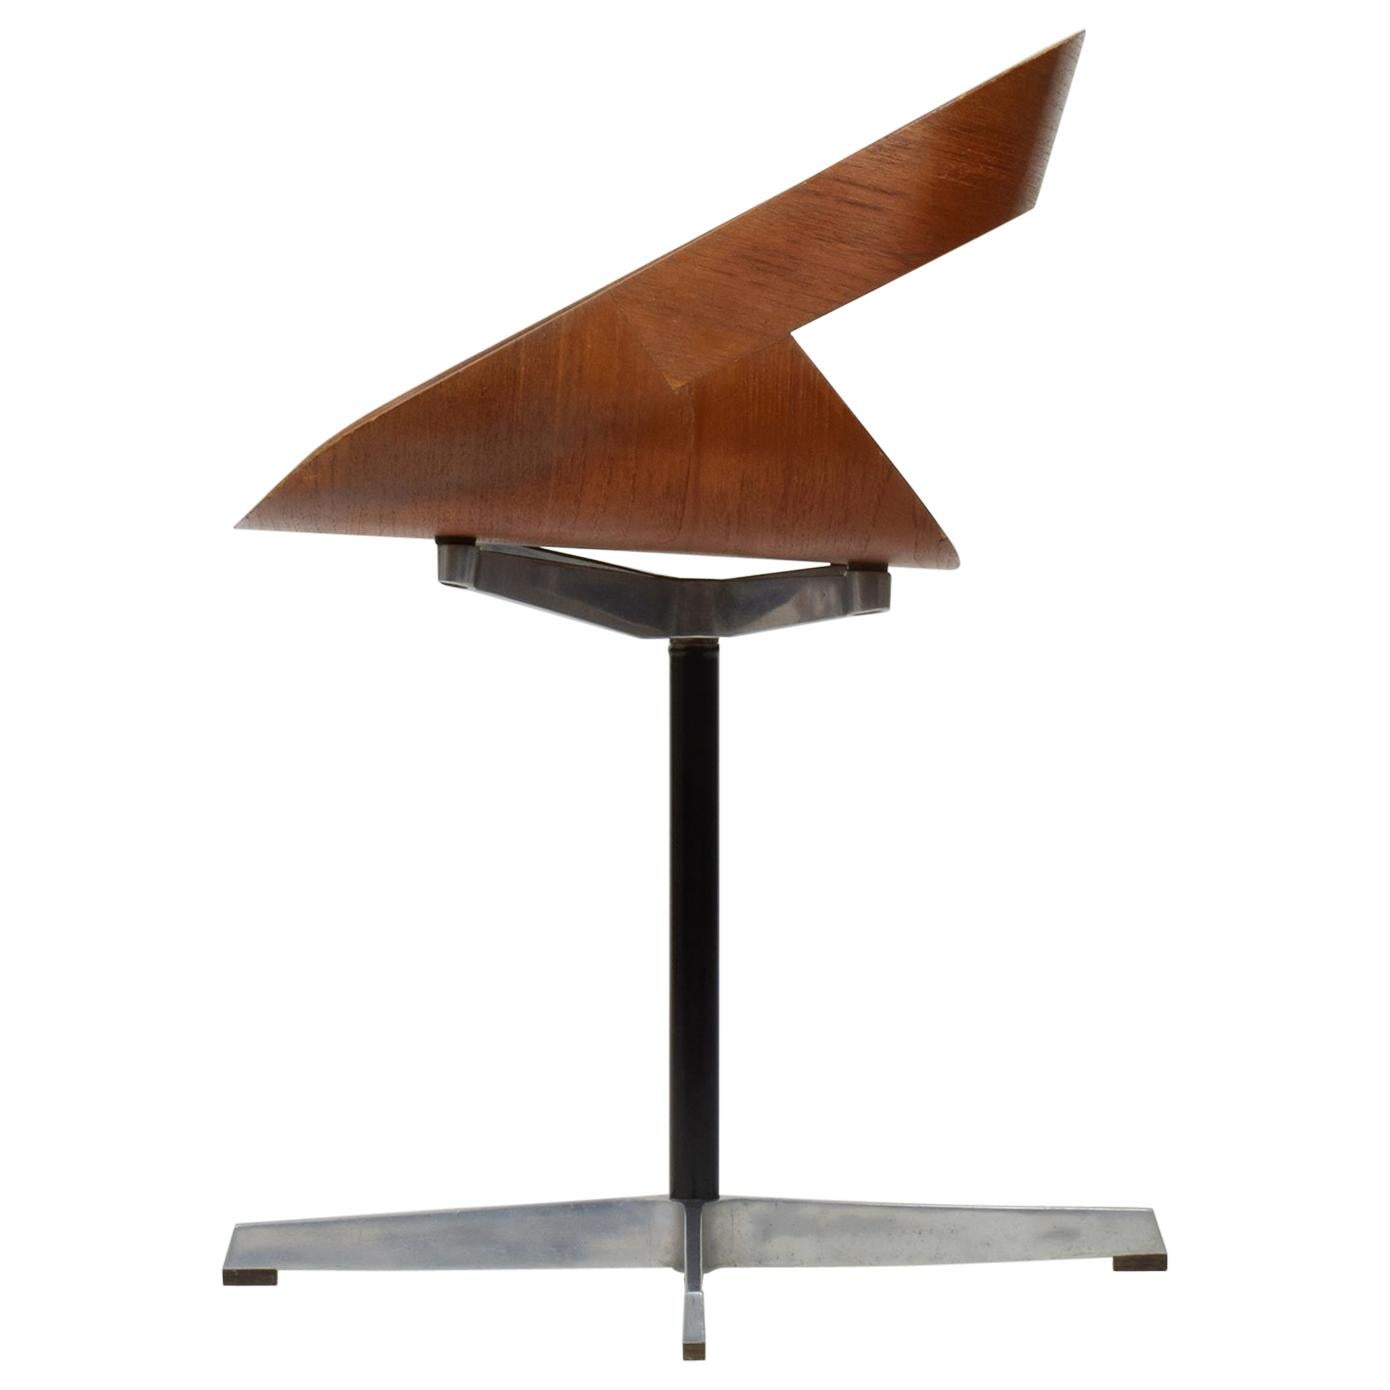 Geoffrey Harcourt, Chair 130, 'RCA' Chair, Designed 1960, Produced by Artifort For Sale